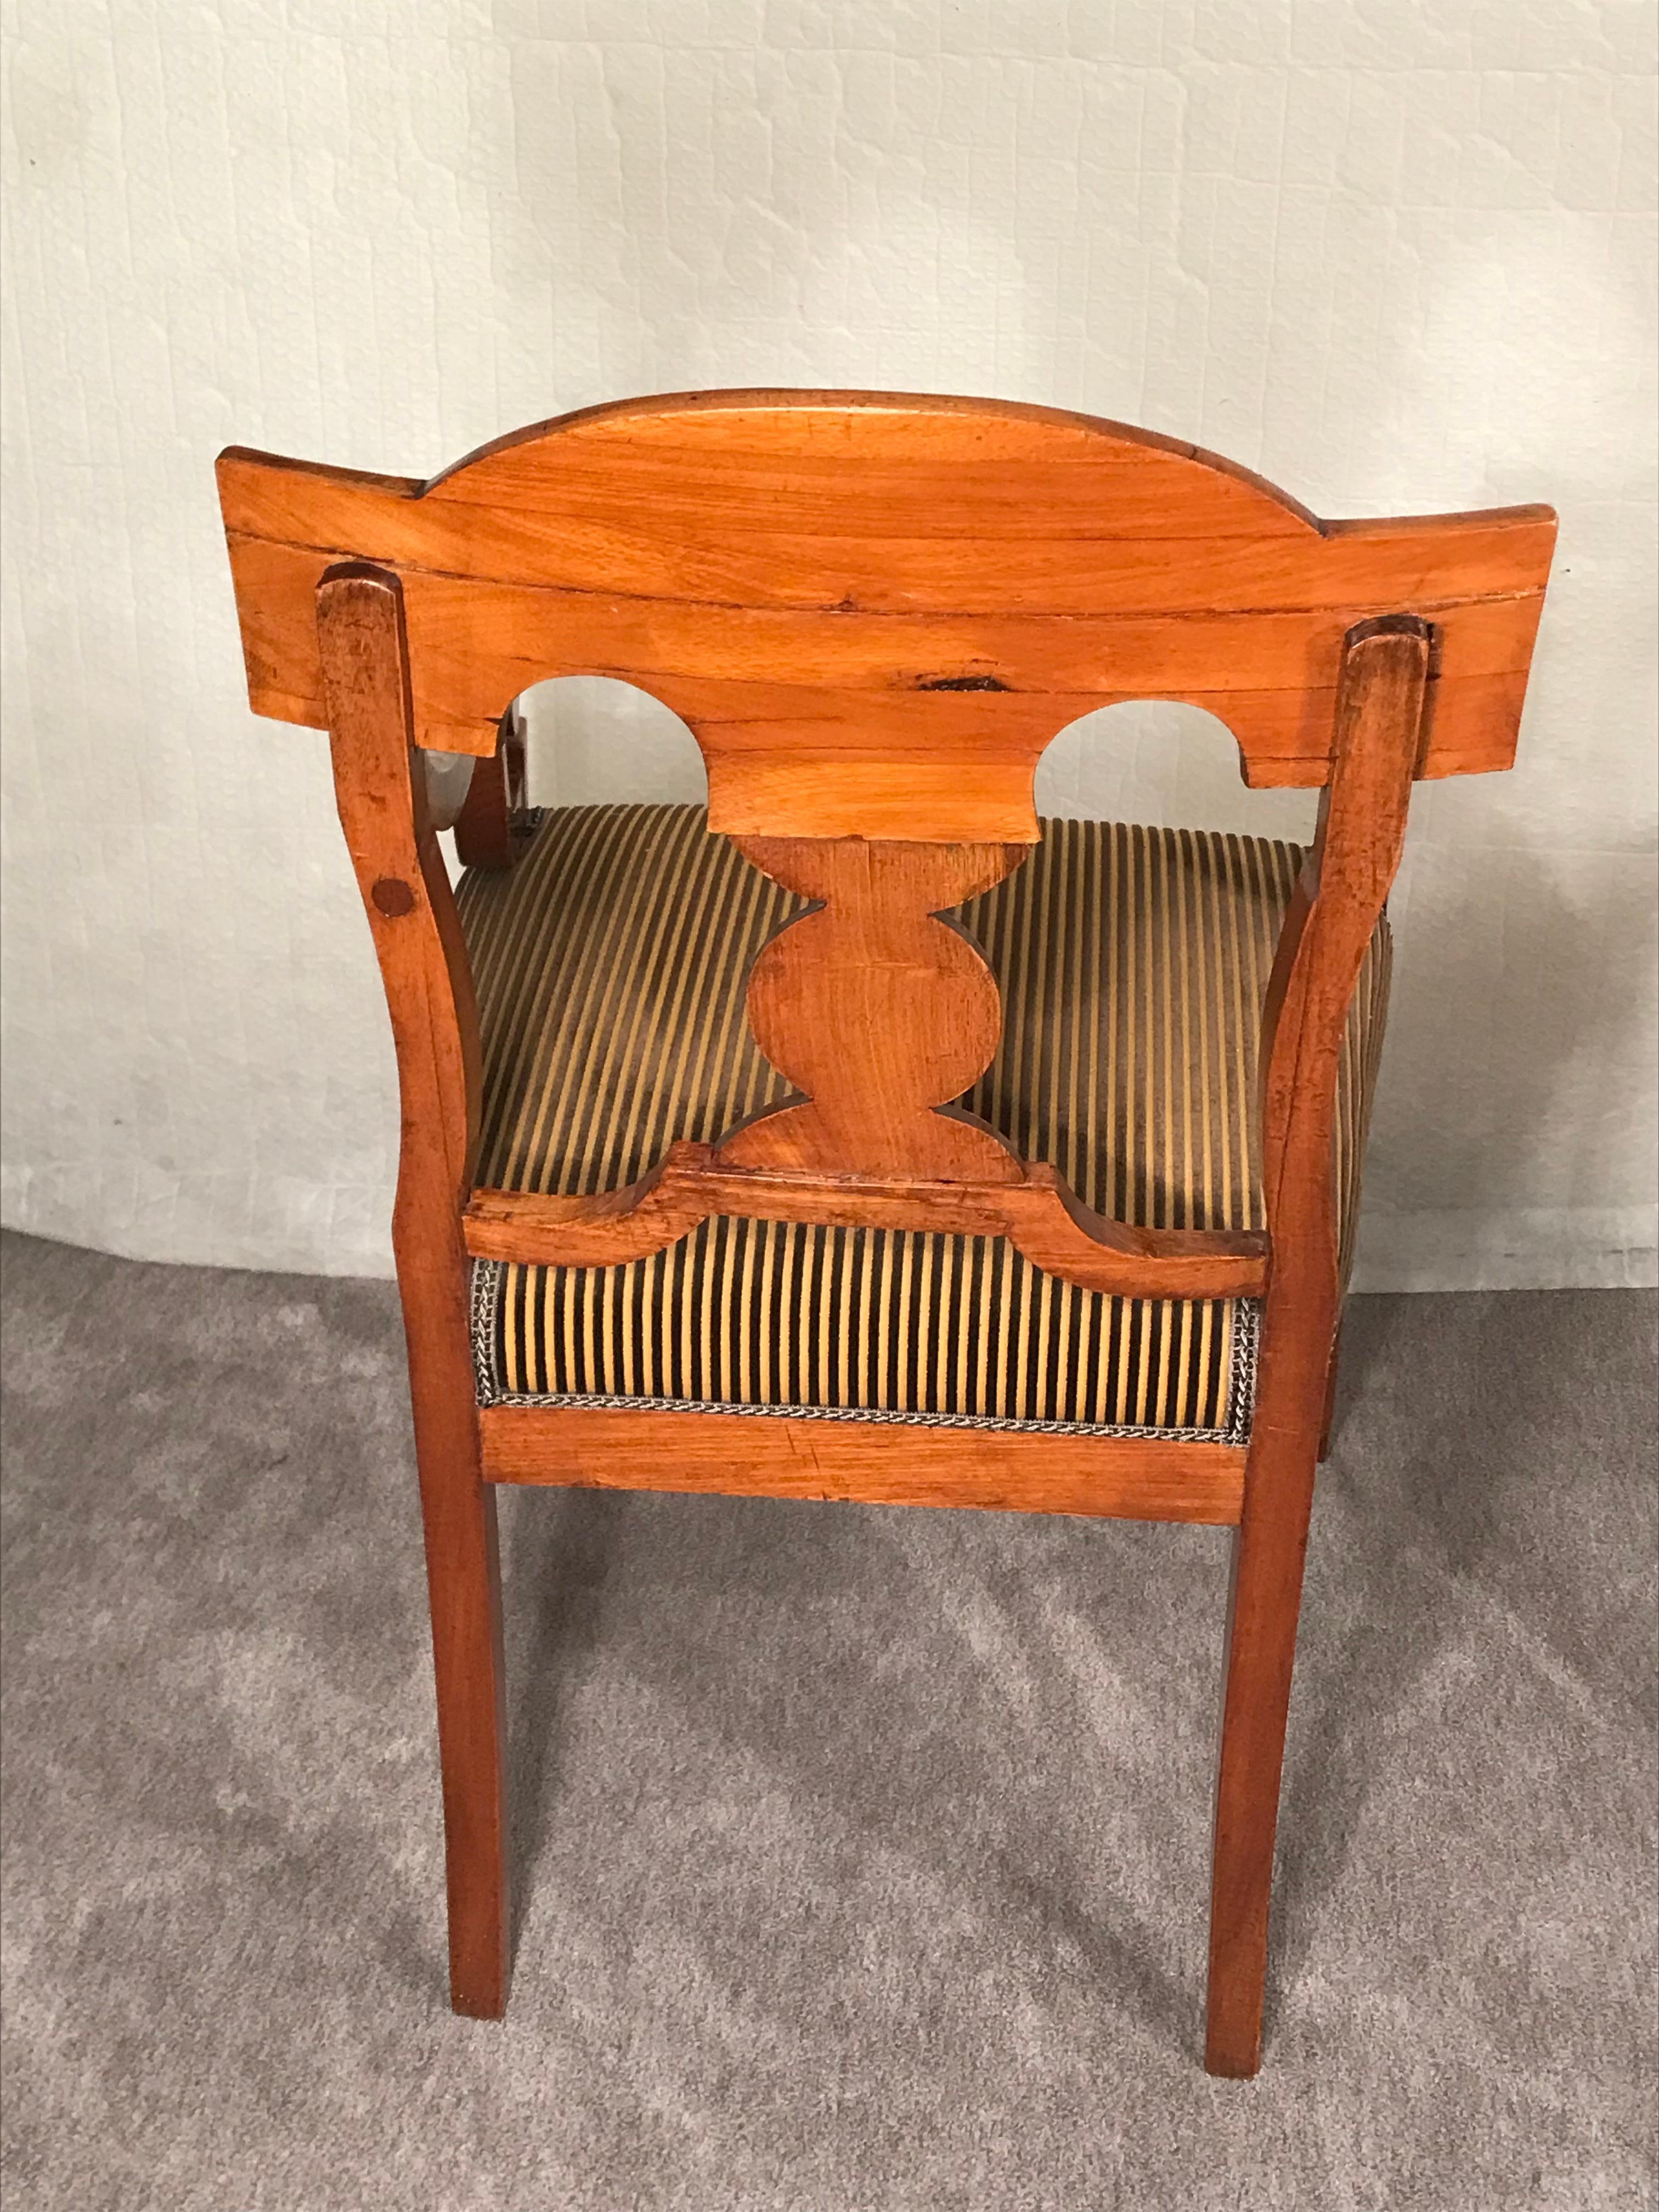 This unique pair of Biedermeier armchairs dates back to around 1820-30 and comes from the northern part of Germany. The northern German Biedermeier is stylistically connected to the so called Golden Age in Denmark. 
The Danish Golden Age is the